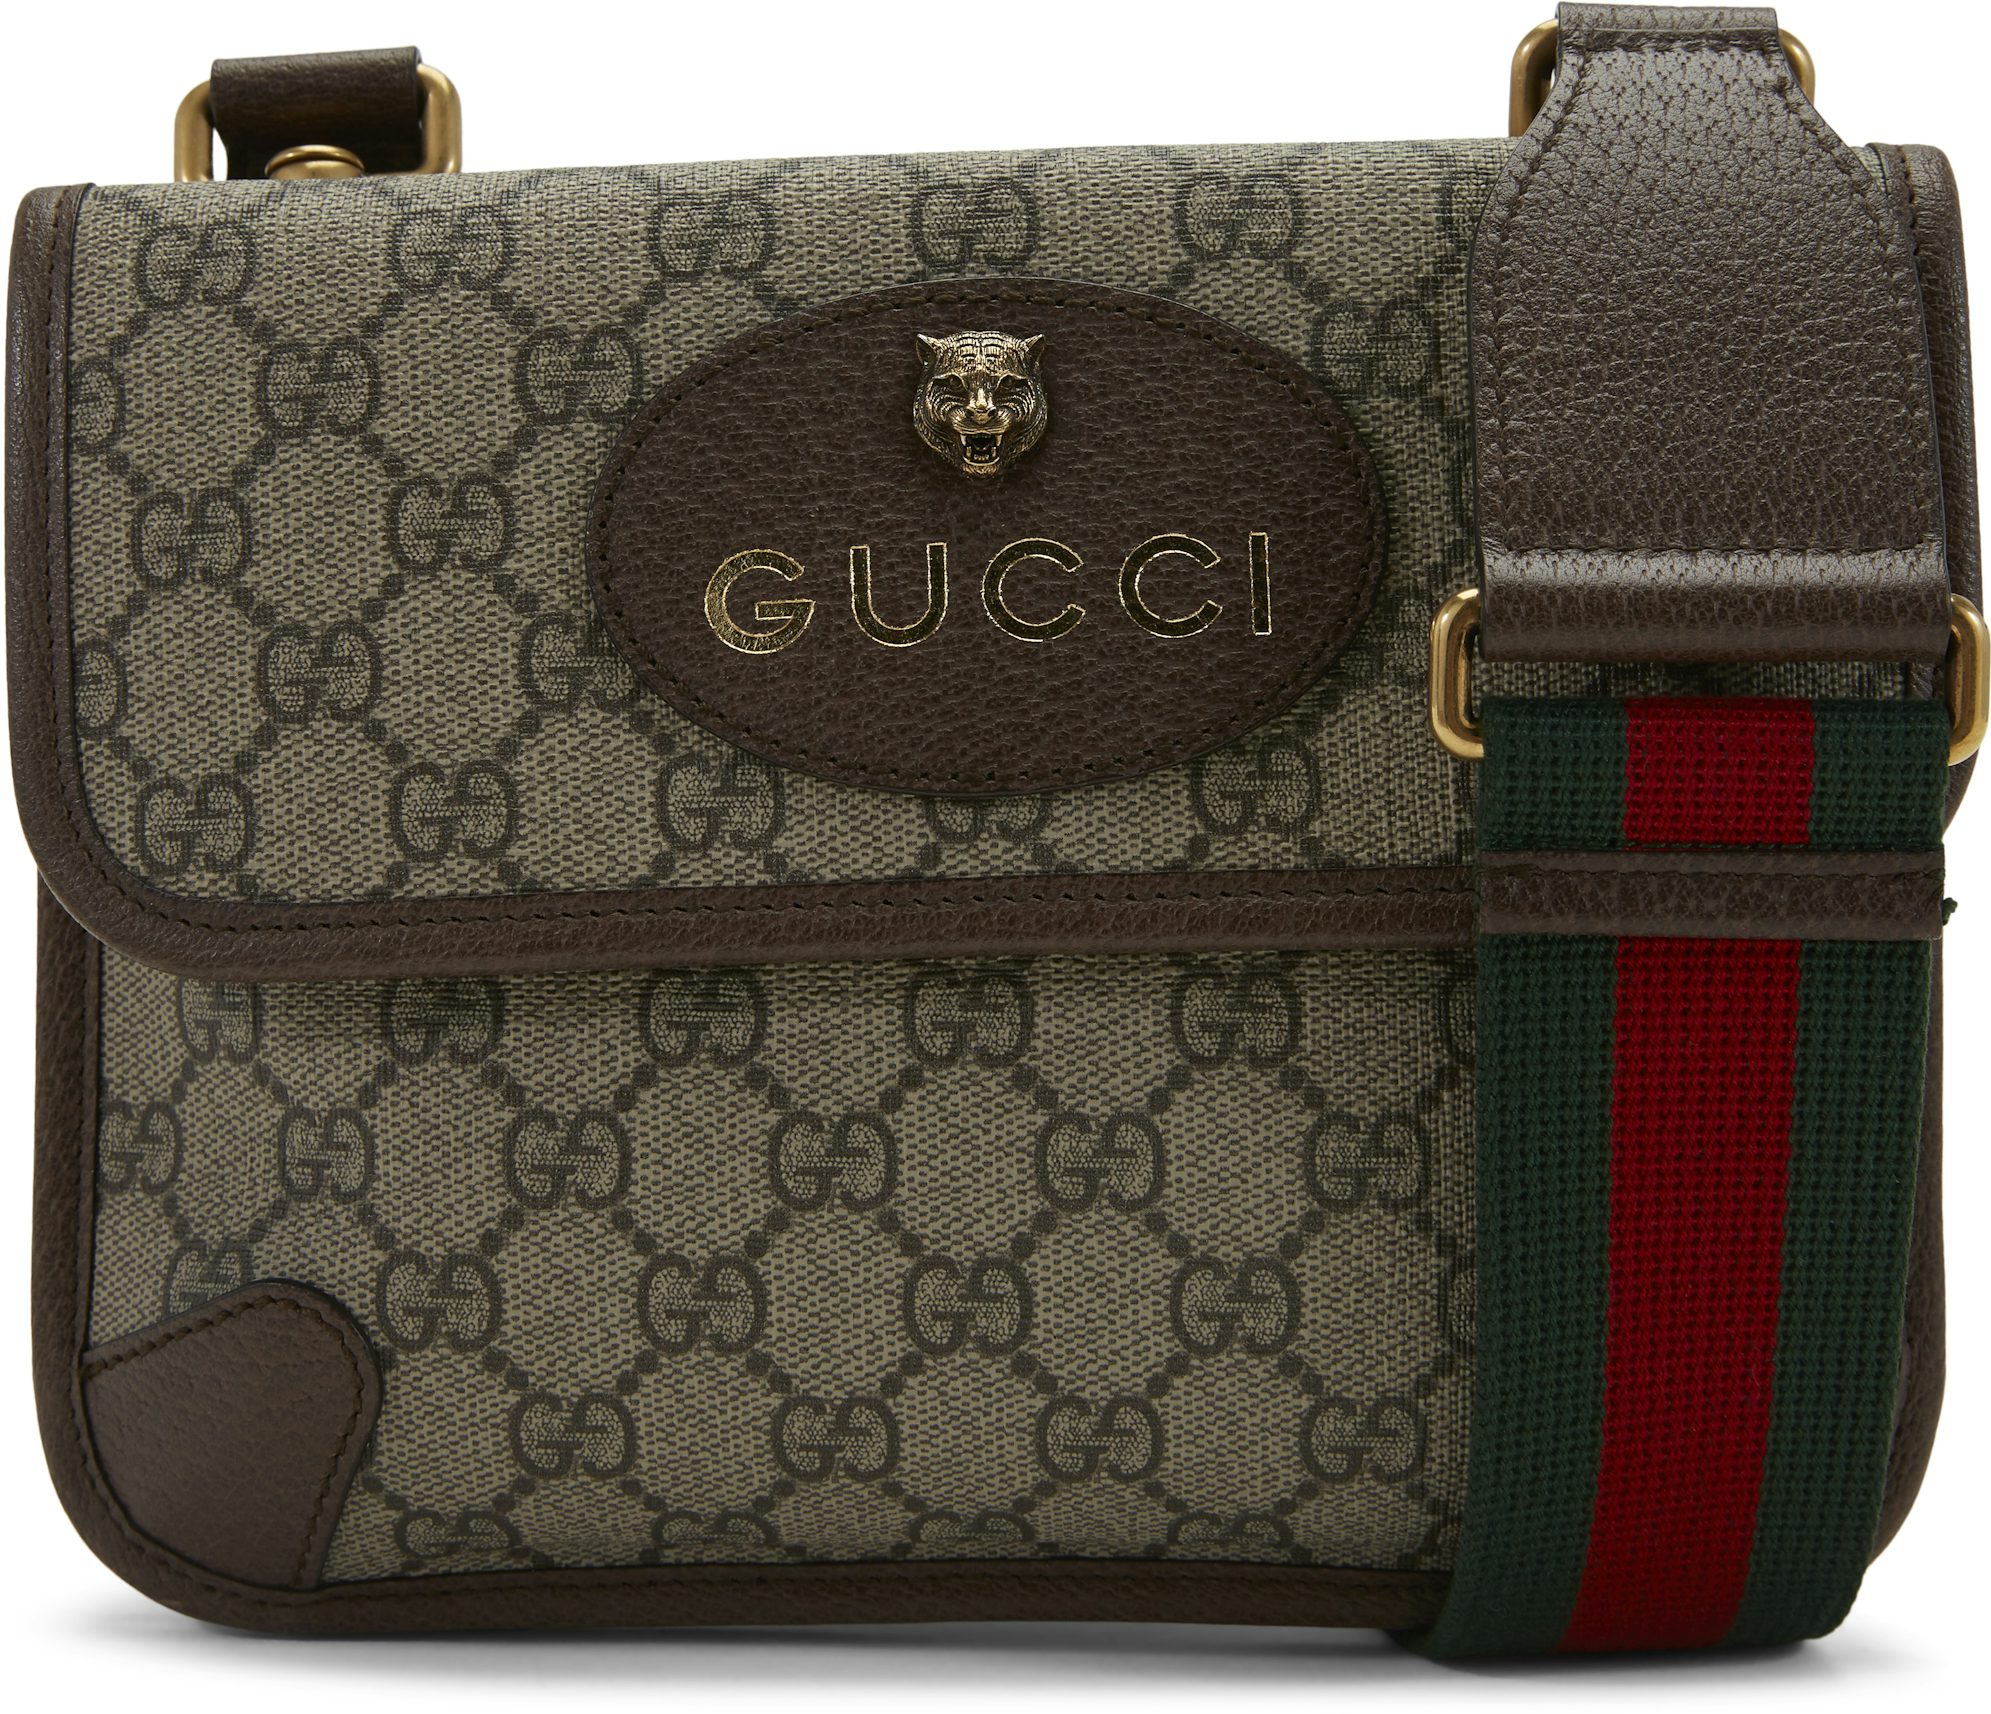 Buy GUCCI Men's Small Flat GG Supreme Canvas Messenger Bag, Brown, One Size  at